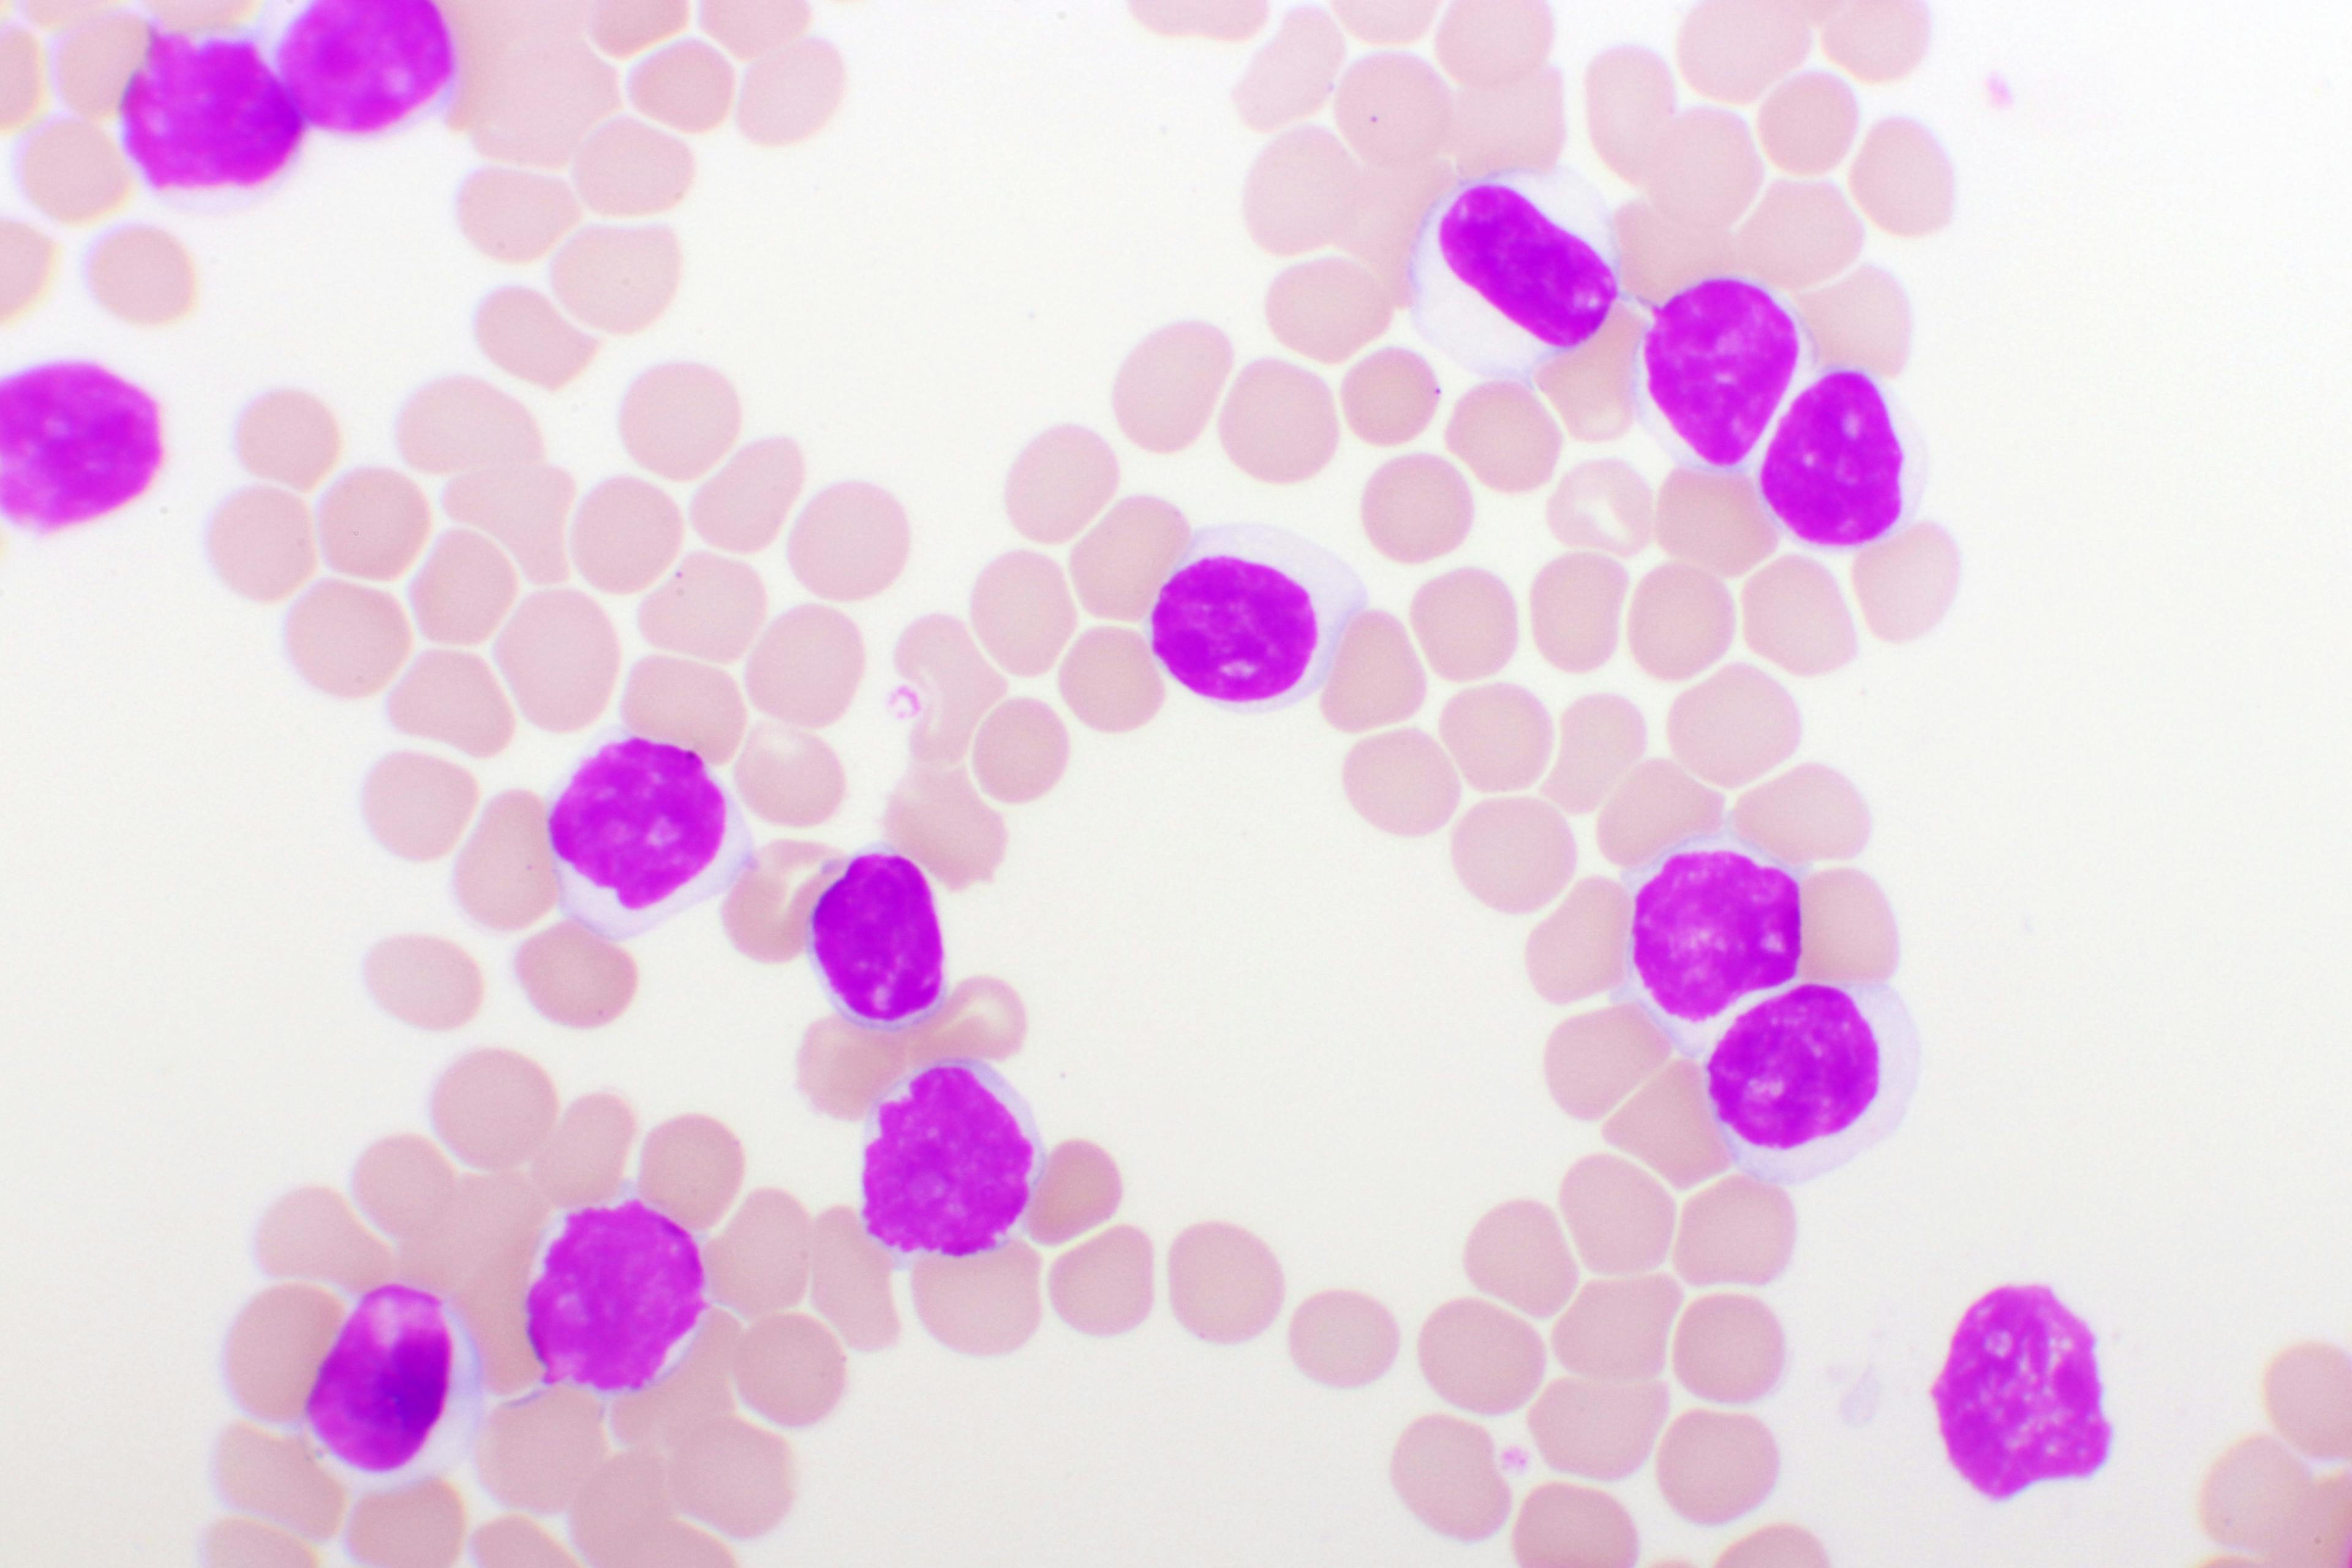 Marrow Lymphocyte Patterns After ASCT May Have Prognostic Value in MM